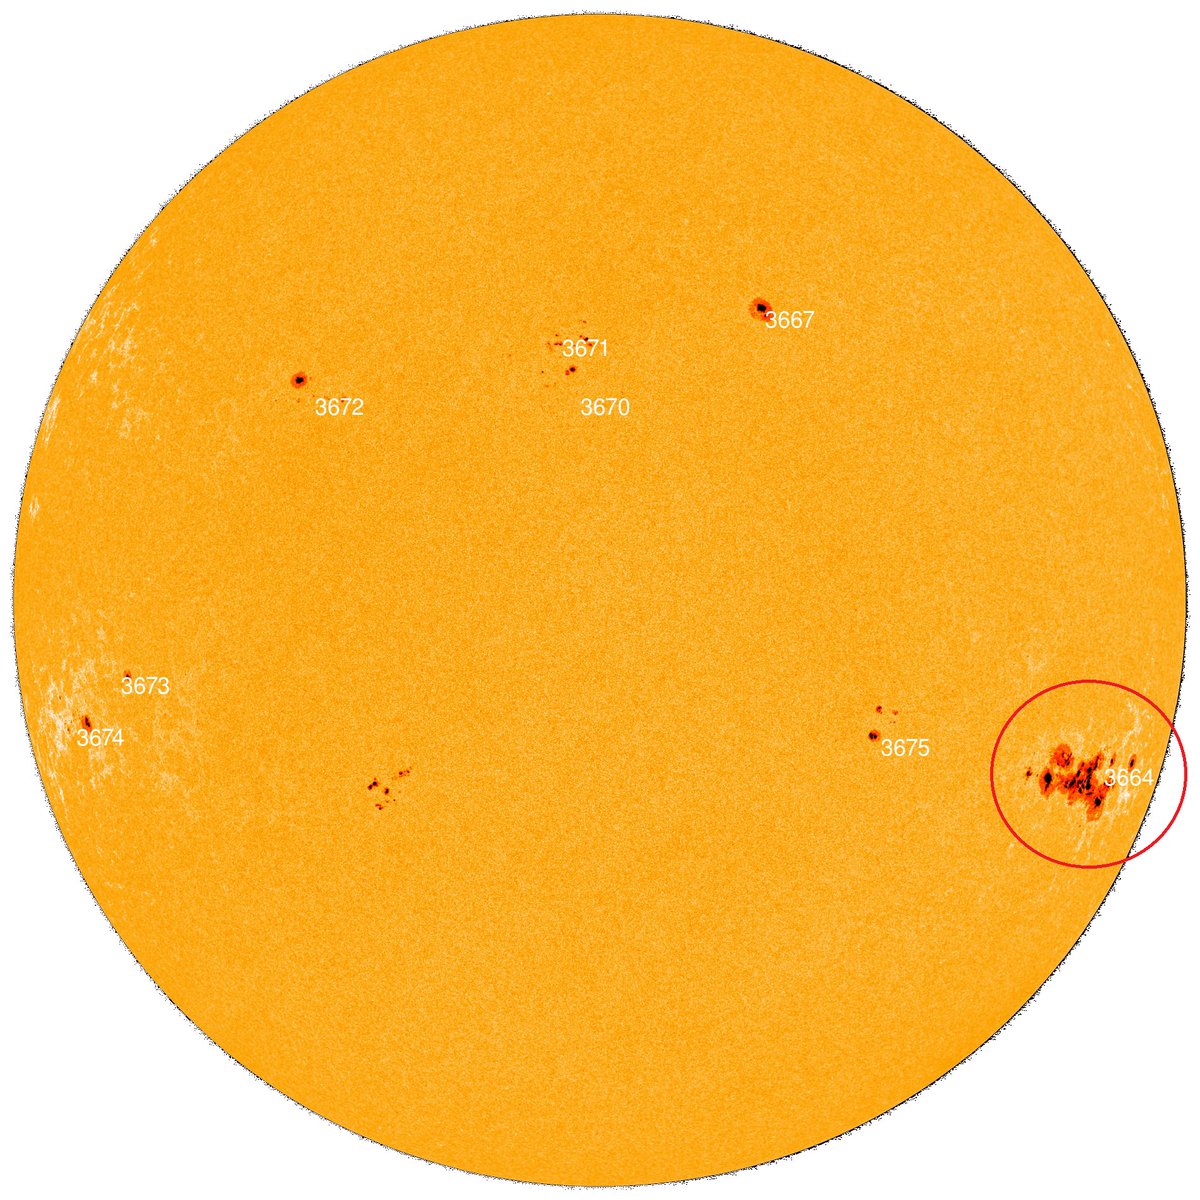 Not sure who needs to know this, but the sun rotates every 24-30 days (faster at equator). The sunspot region responsible for the geomagnetic storm (AR3664) will rotate back in the Earth's line of sight in 2.5-3 weeks.